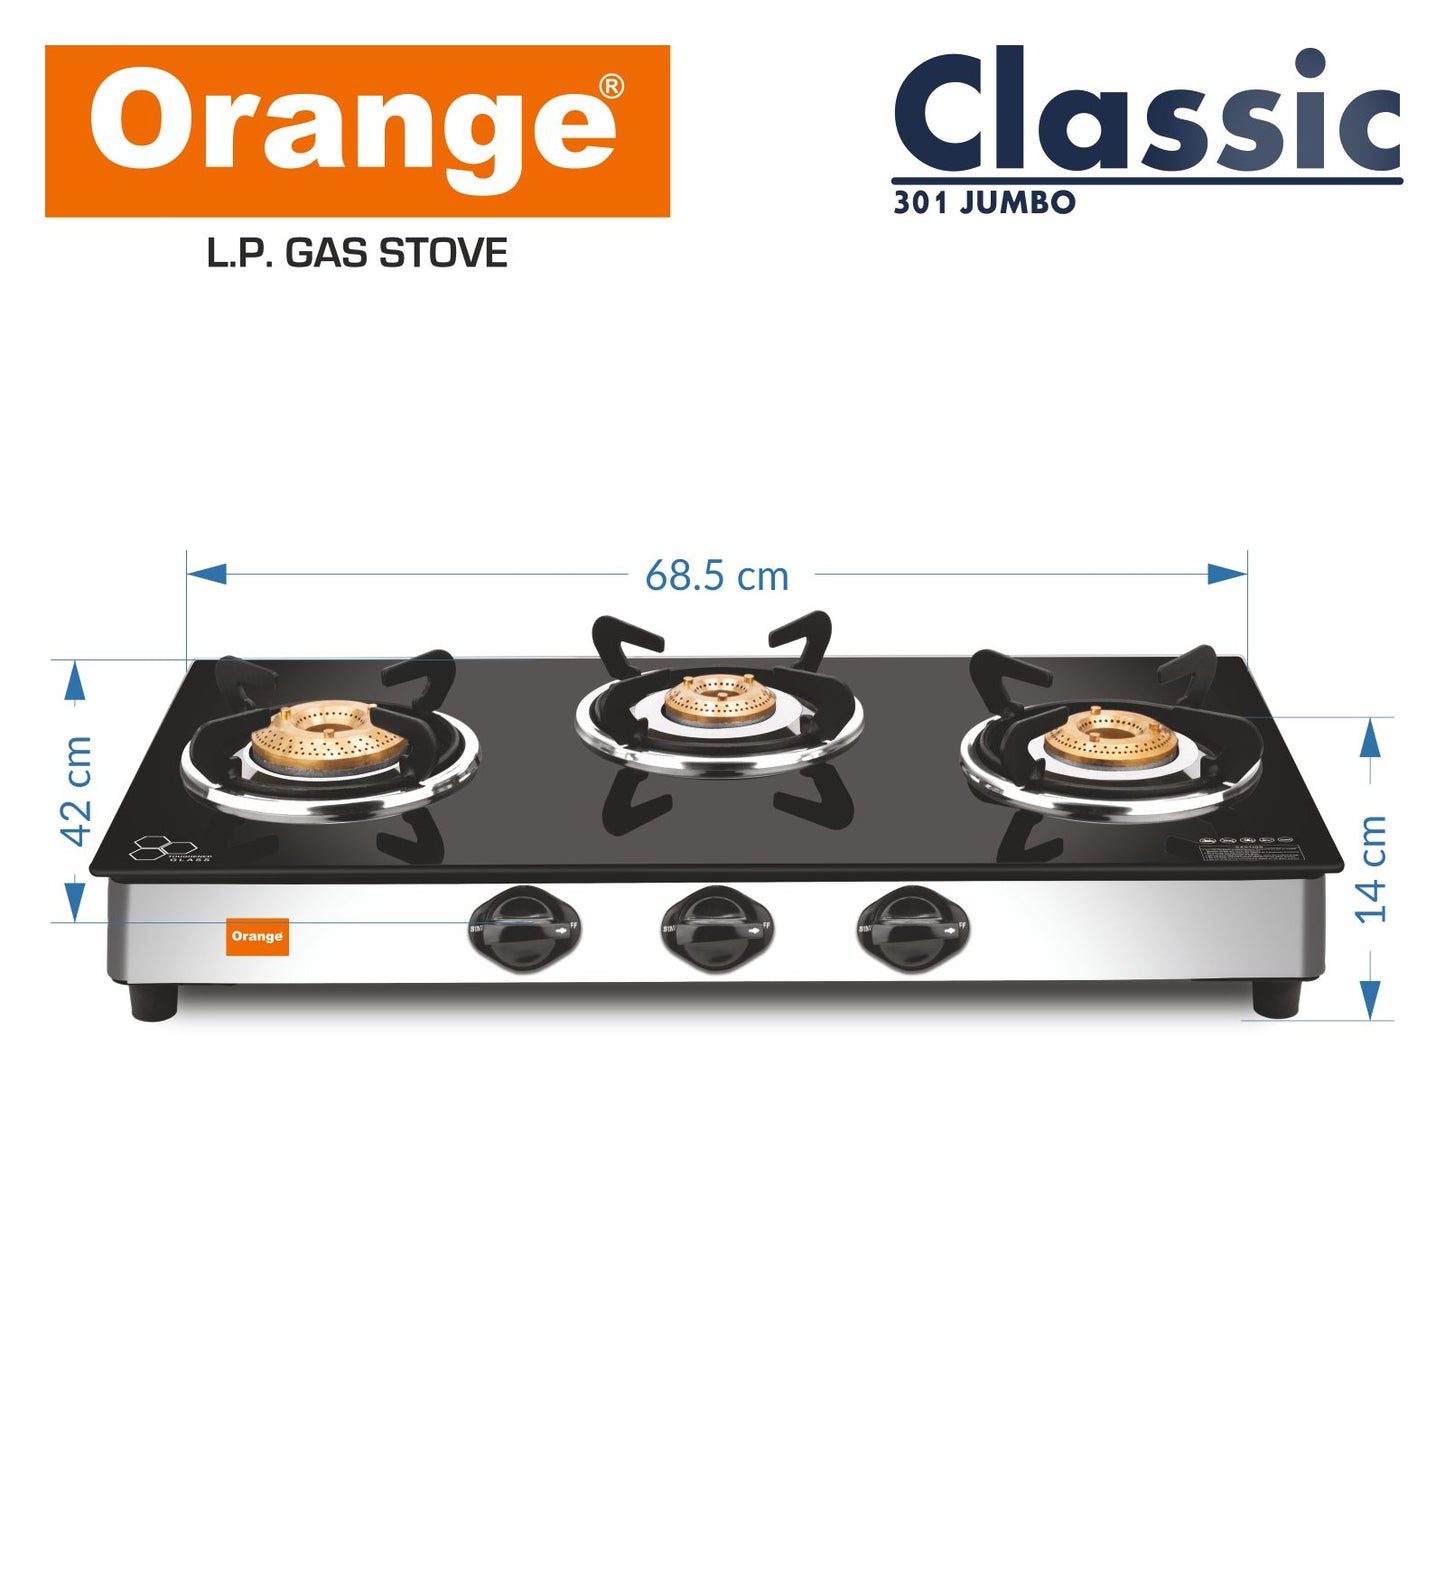 Orange Classic 3 Burner With Glass Top Gas Stove Black Stainless Steel